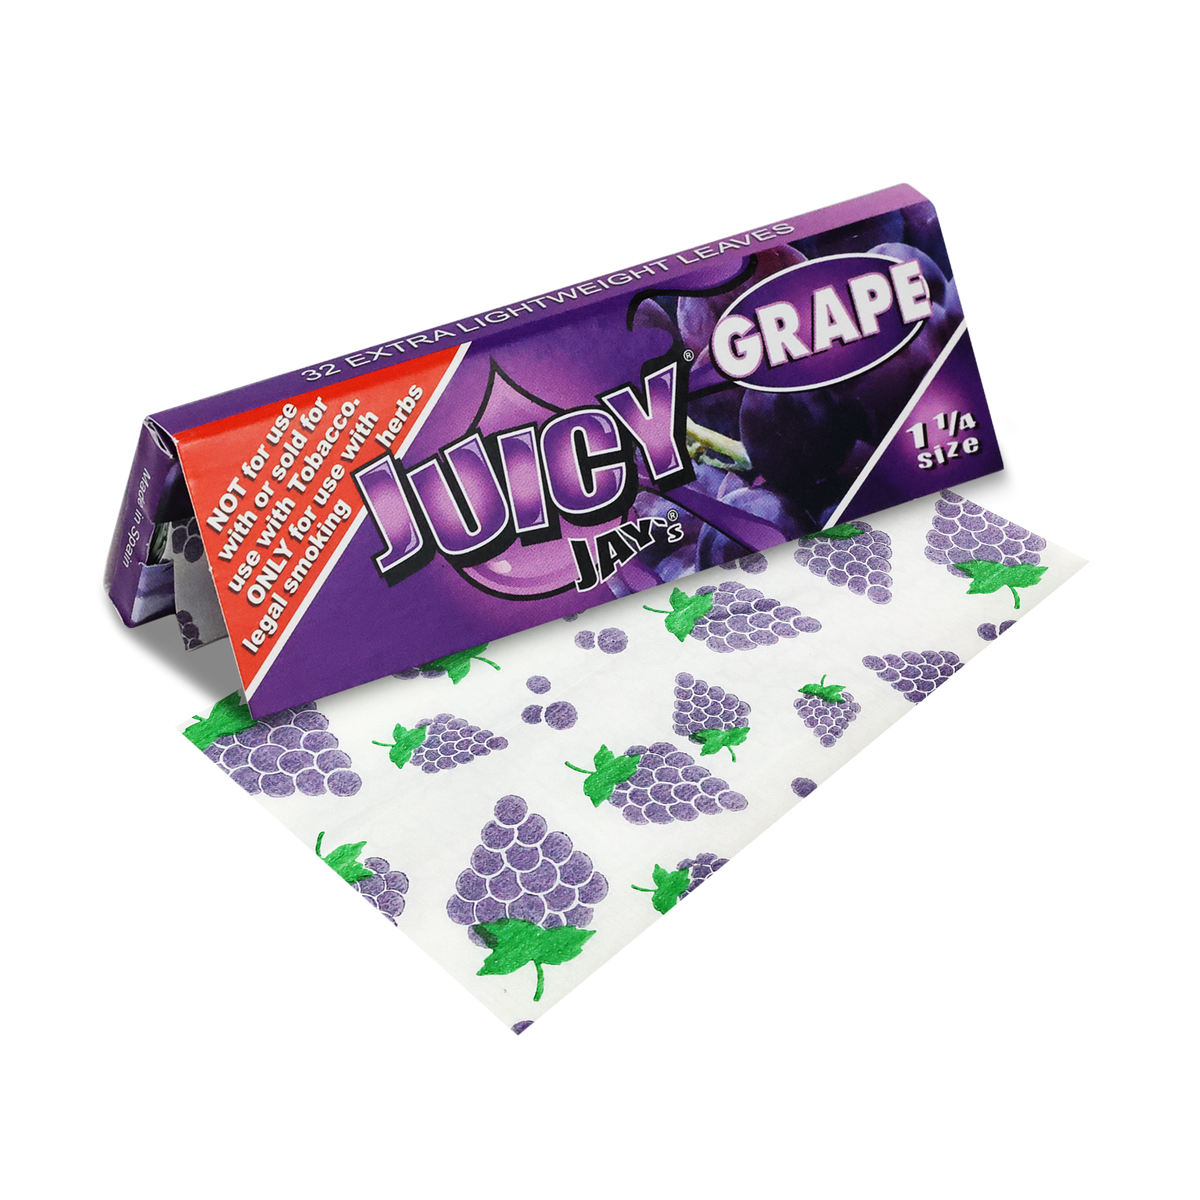 Juicy Jays 1 1/4 Grape Flavored Hemp Rolling Papers Rolling Papers esd-official